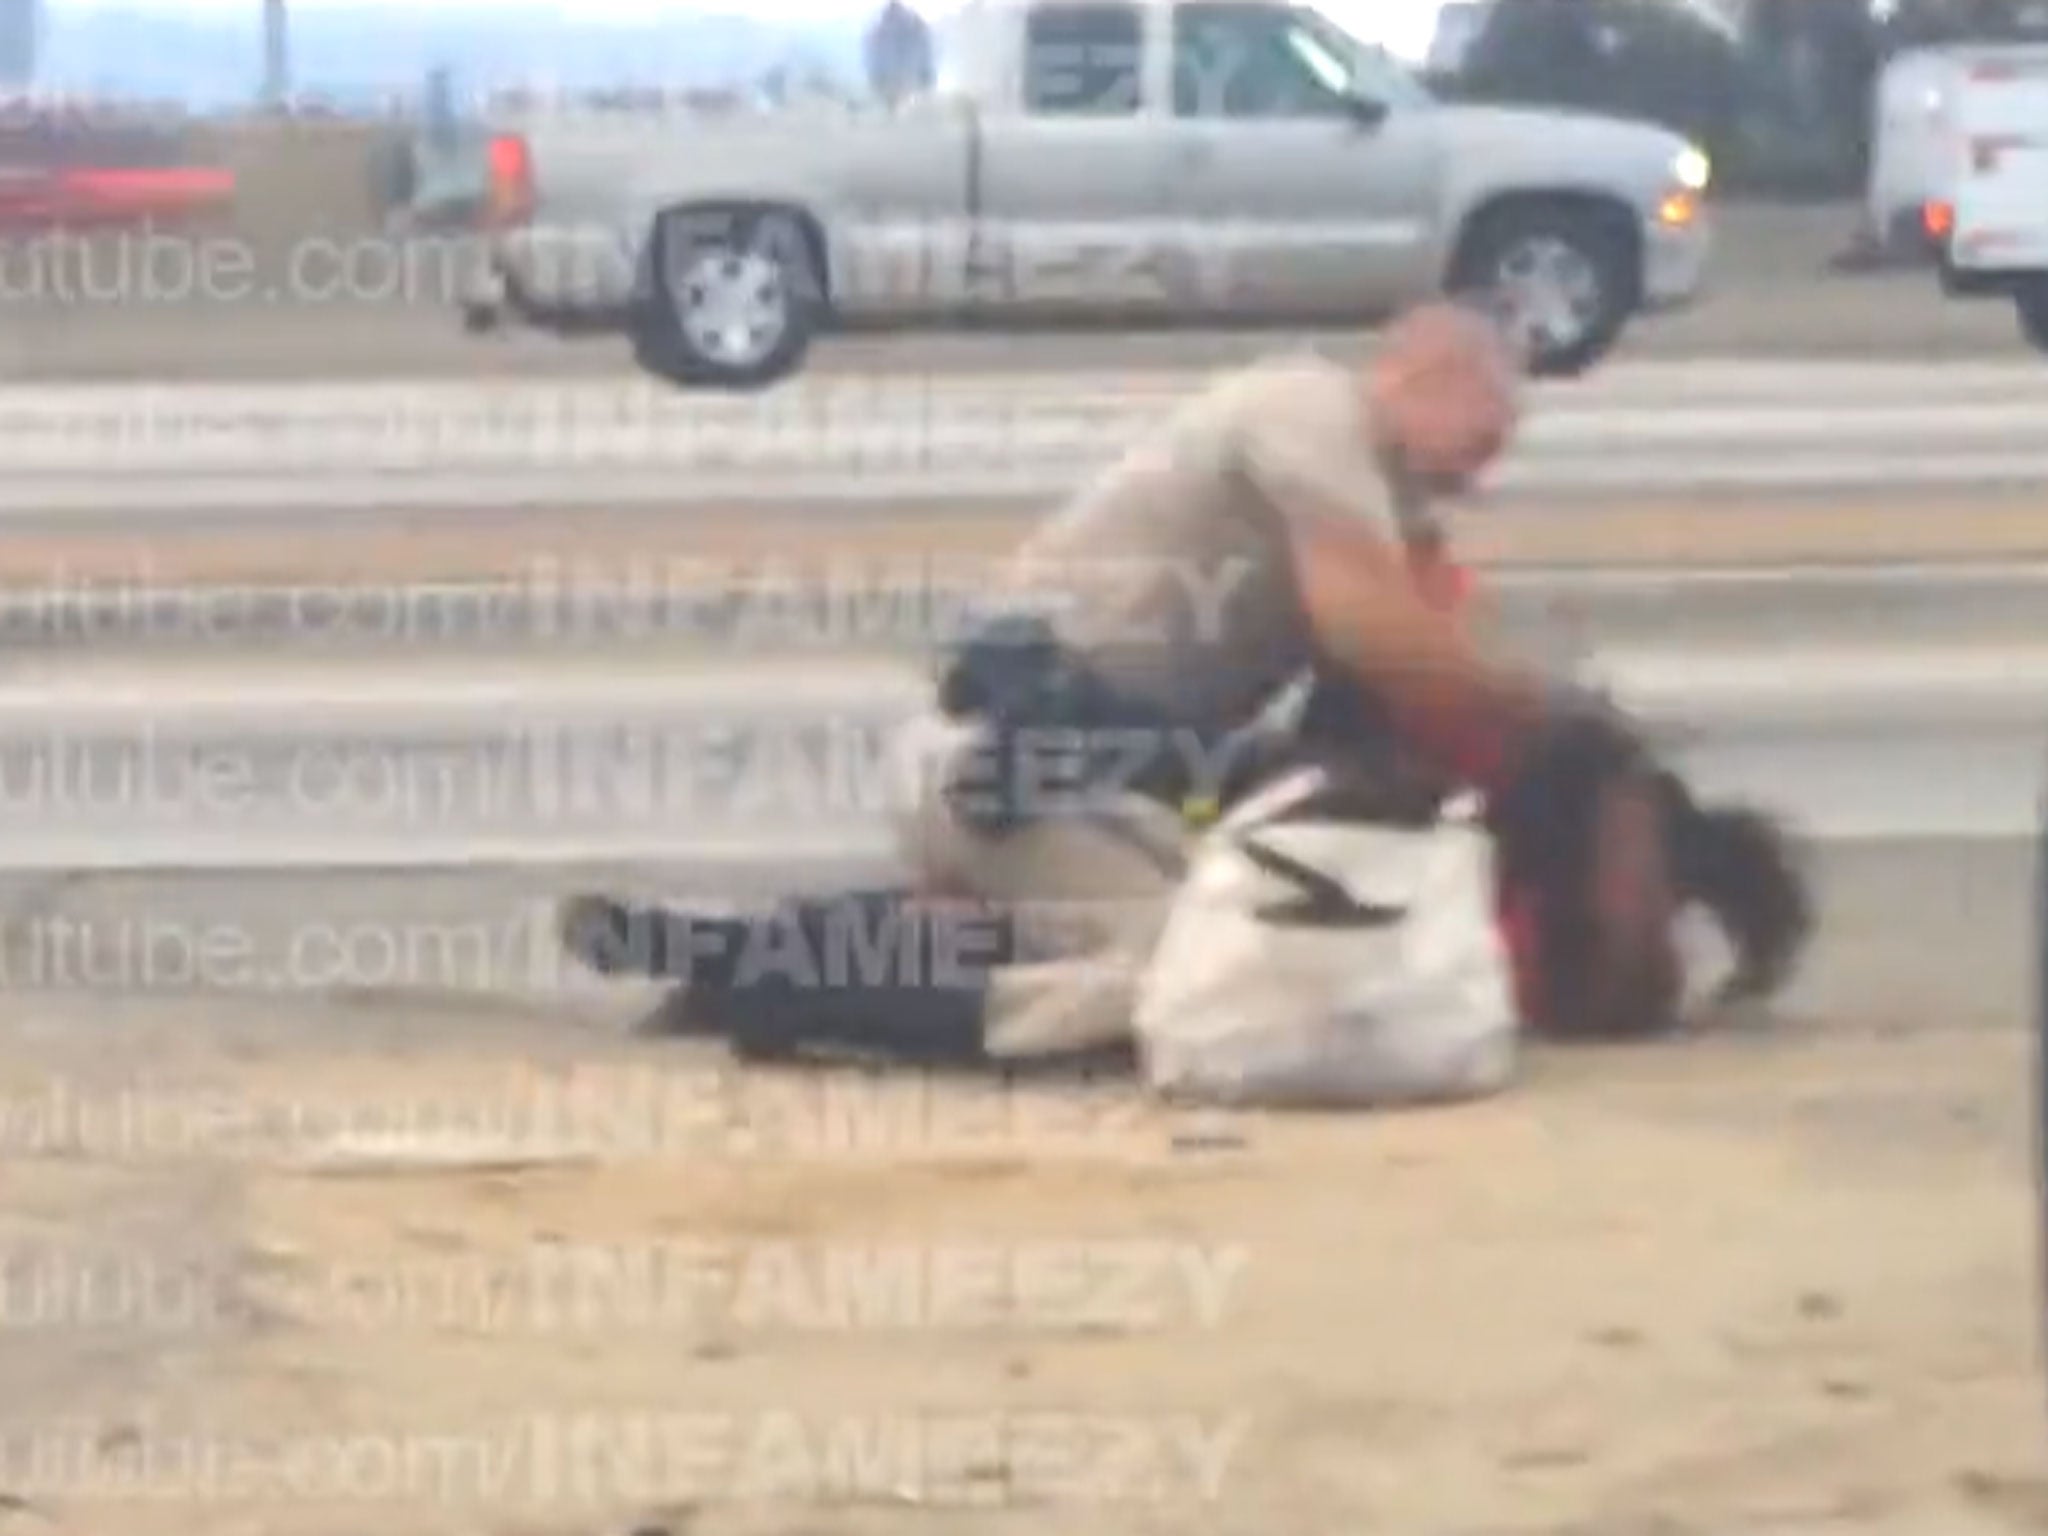 A still from a video appearing to show a CHP officer repeatedly punching a woman in the head